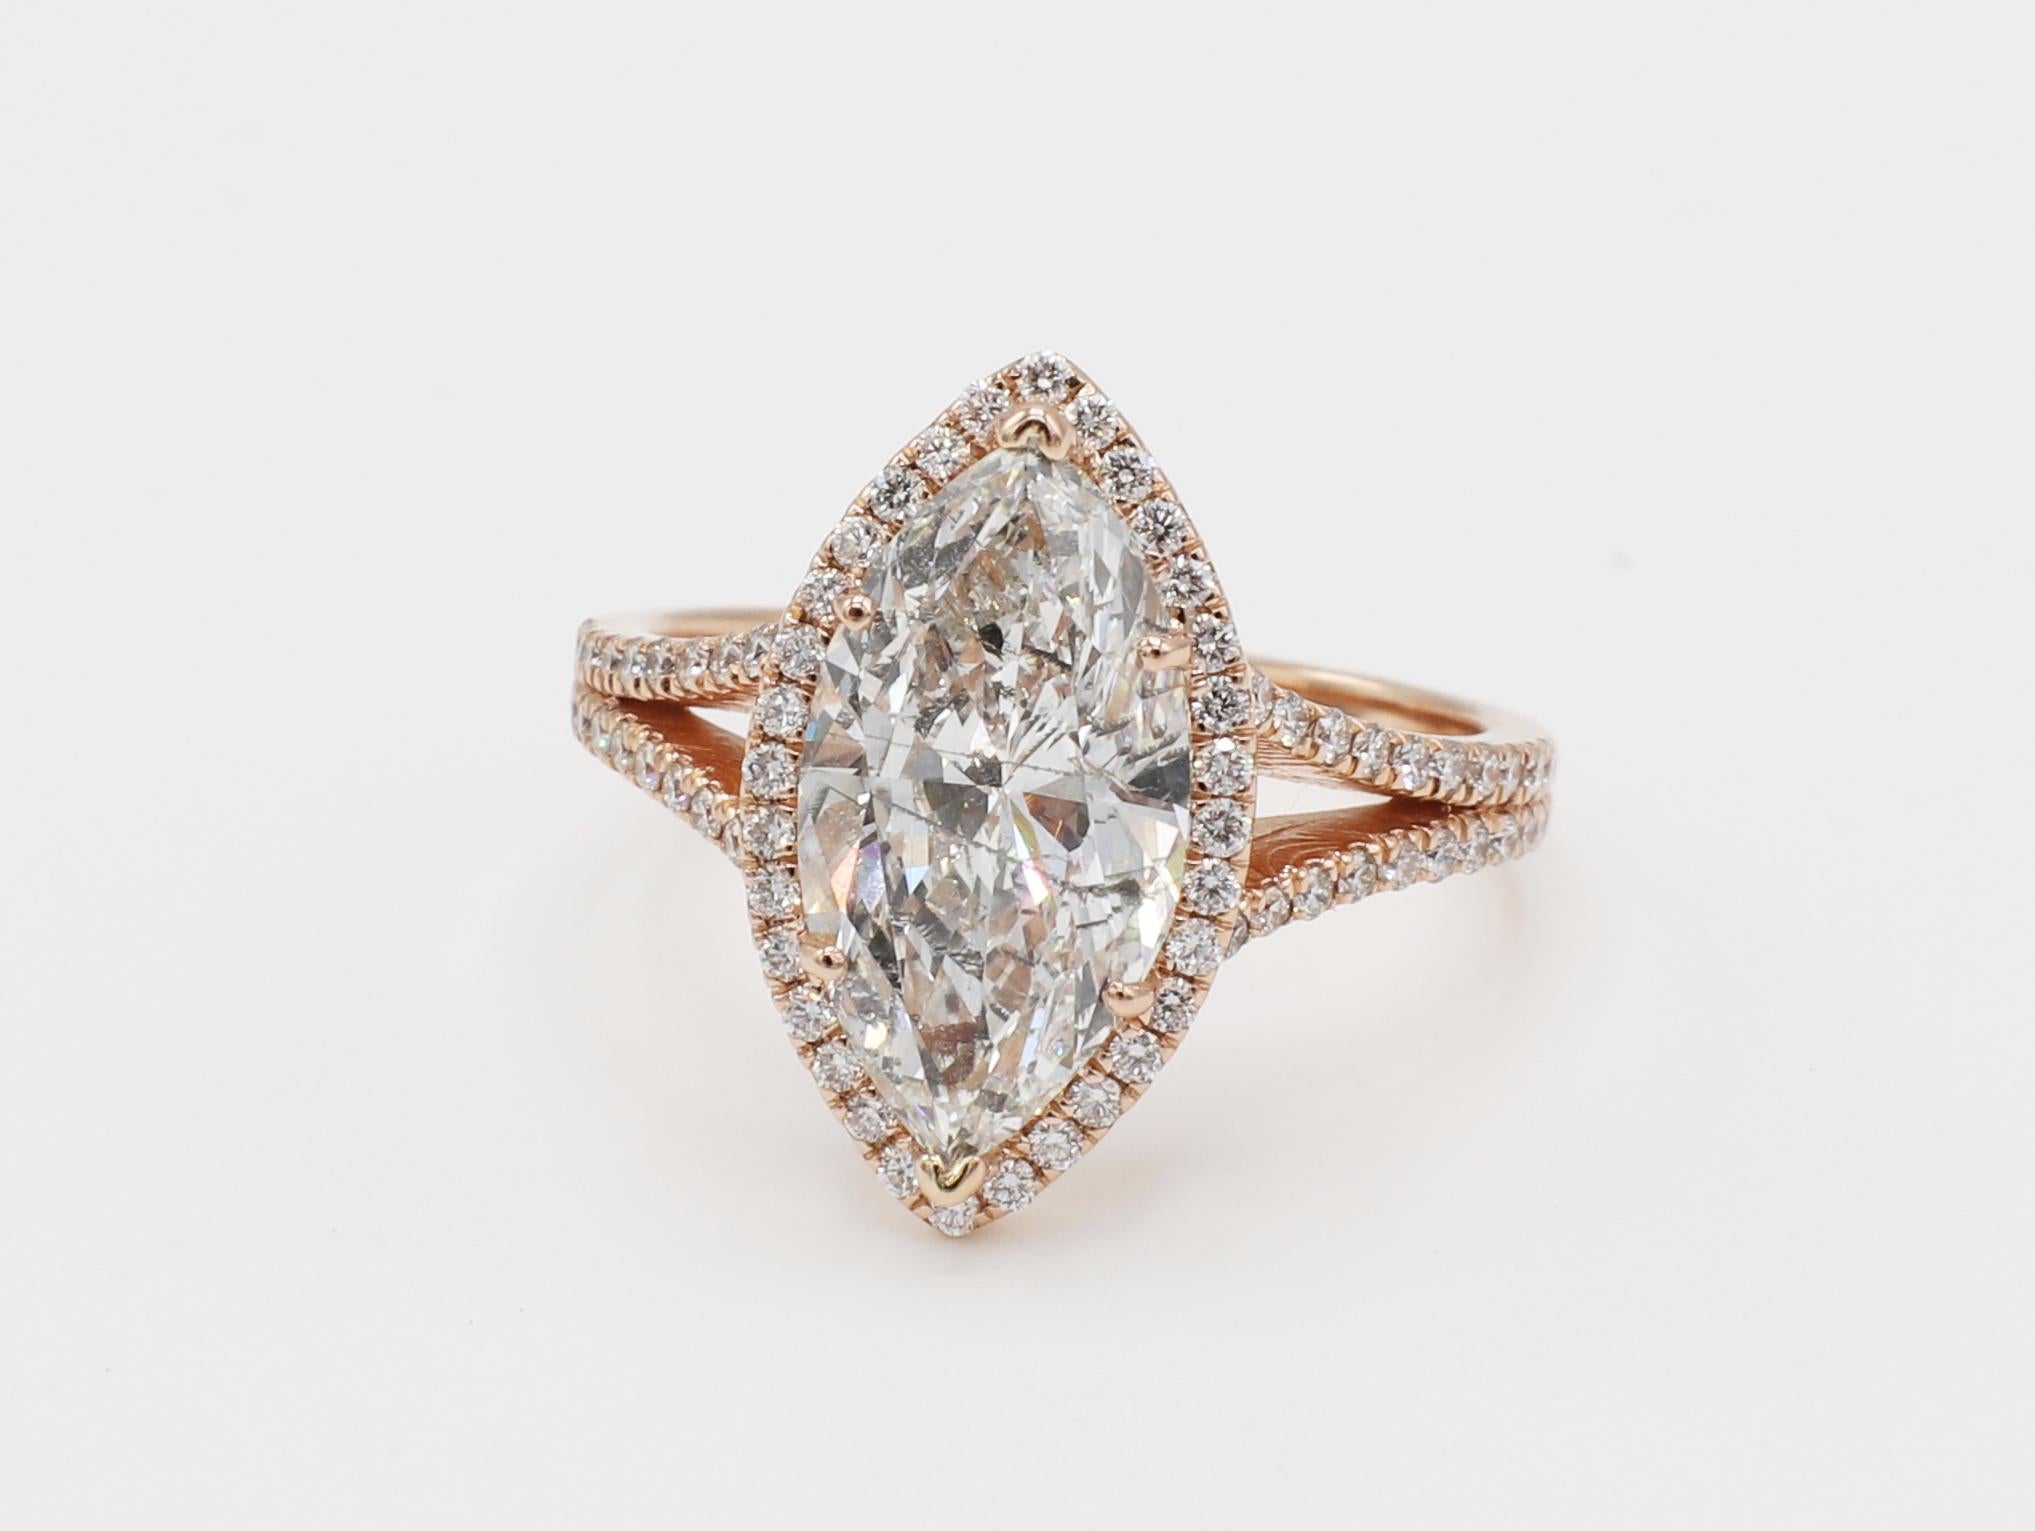 14 Karat Rose Gold 3.02 Carat Marquise Diamond Halo Engagement Ring Size 6.25
Metal: 14k rose gold
Weight: 3.72 grams
Diamond: Marquise, 3.02 carat. Approx. I I1
Accent diamonds: Approx. .45 CTW G VS
Dimensions: 17 x 9.7MM
Size: 6.25 (US)

